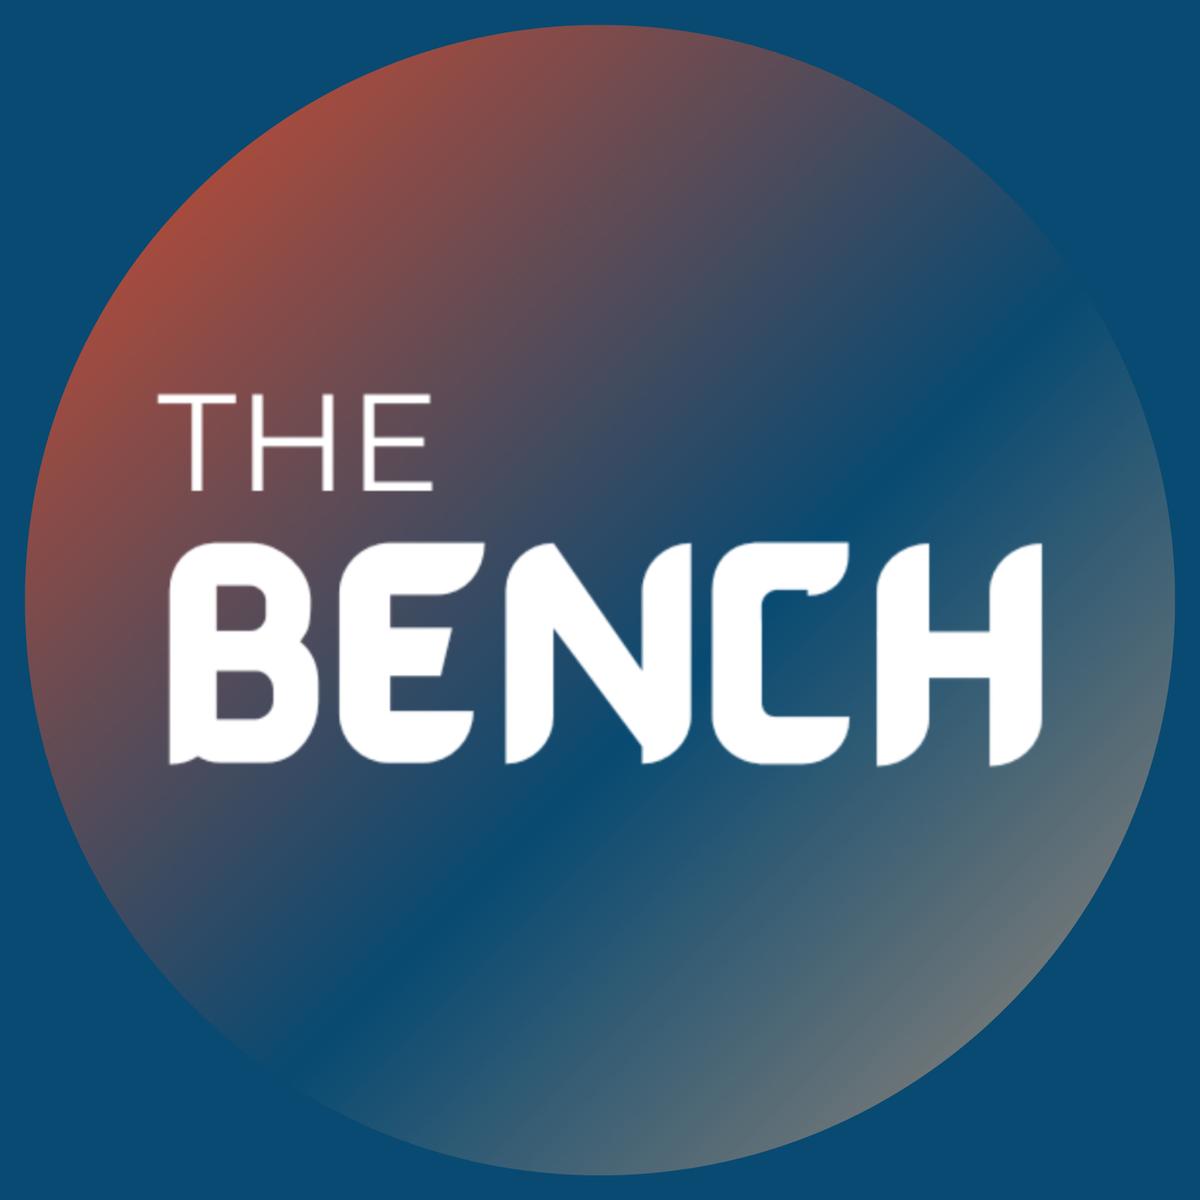 benchtheapp's images